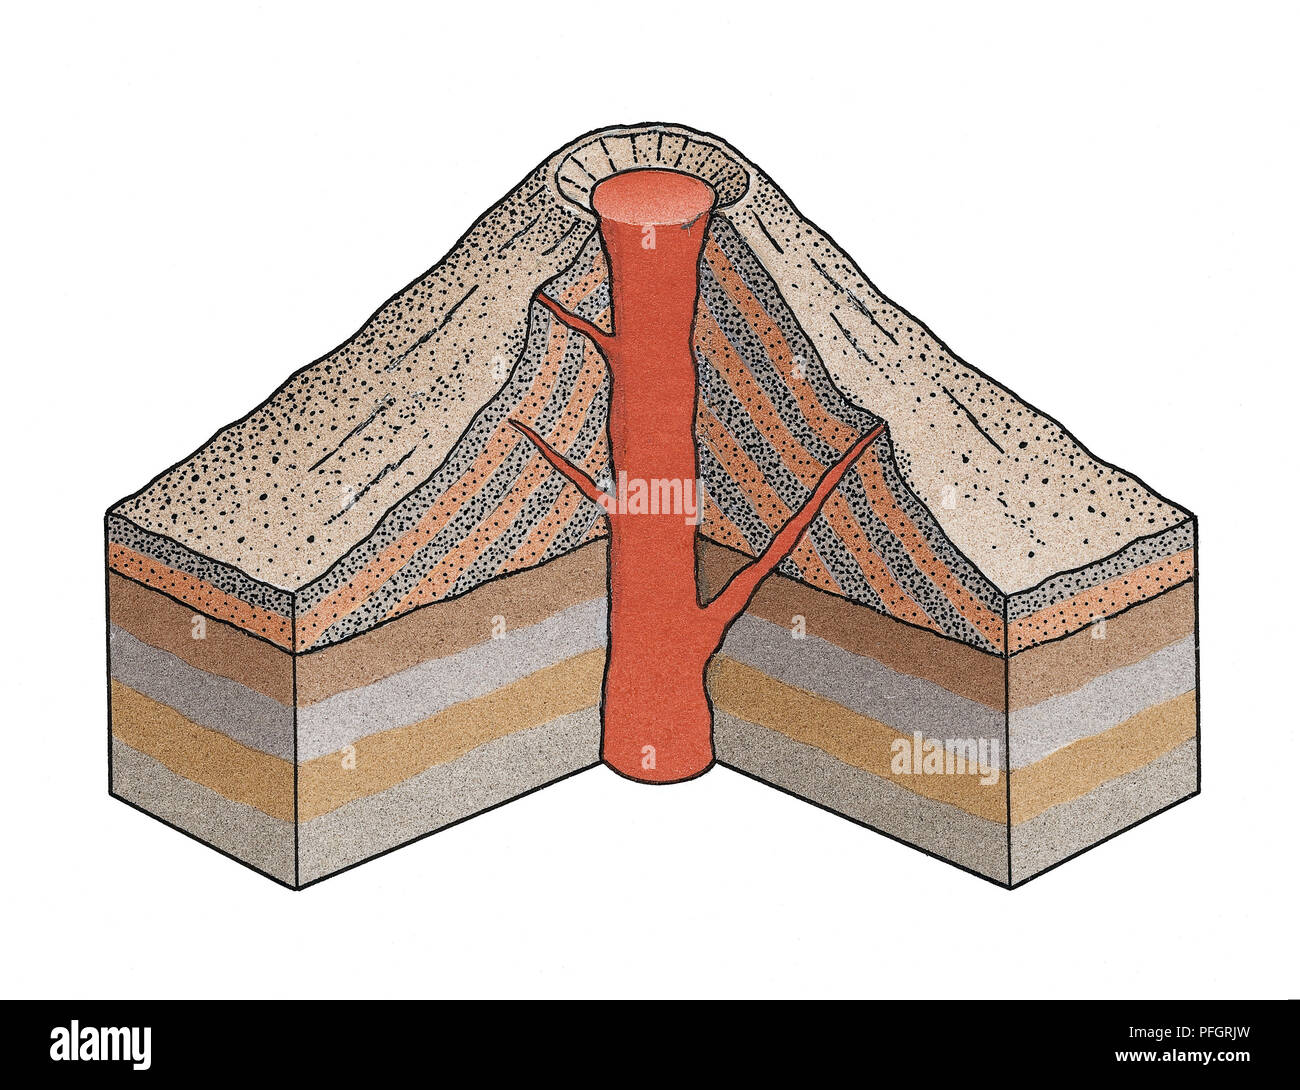 Artwork cross-section diagram of a volcano showing the vent, magma, strata and a gentle slope of basaltic lava flow. Stock Photo